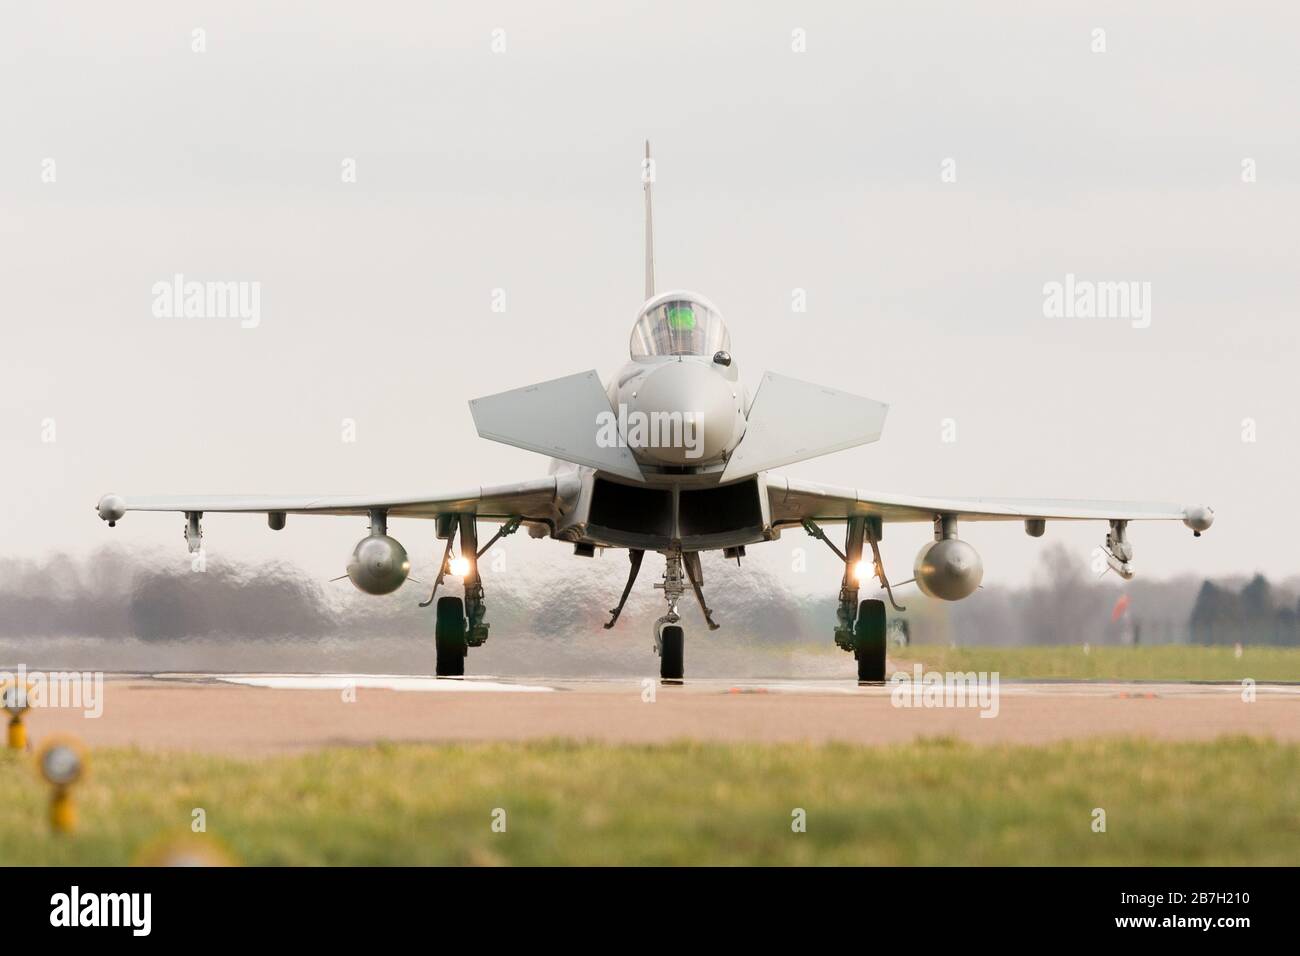 RAF Coningsby, Lincolnshire, UK. 16th Mar, 2020. Typhoon aircraft of 29 squadron landing after a practice flight from Royal Air Force Coningsby, Lincolnshire. RAF airshows later in the year are under threat of postponement or cancellation due to the COVID-19 pandemic. Credit: Peter Lopeman/Alamy Live News Stock Photo